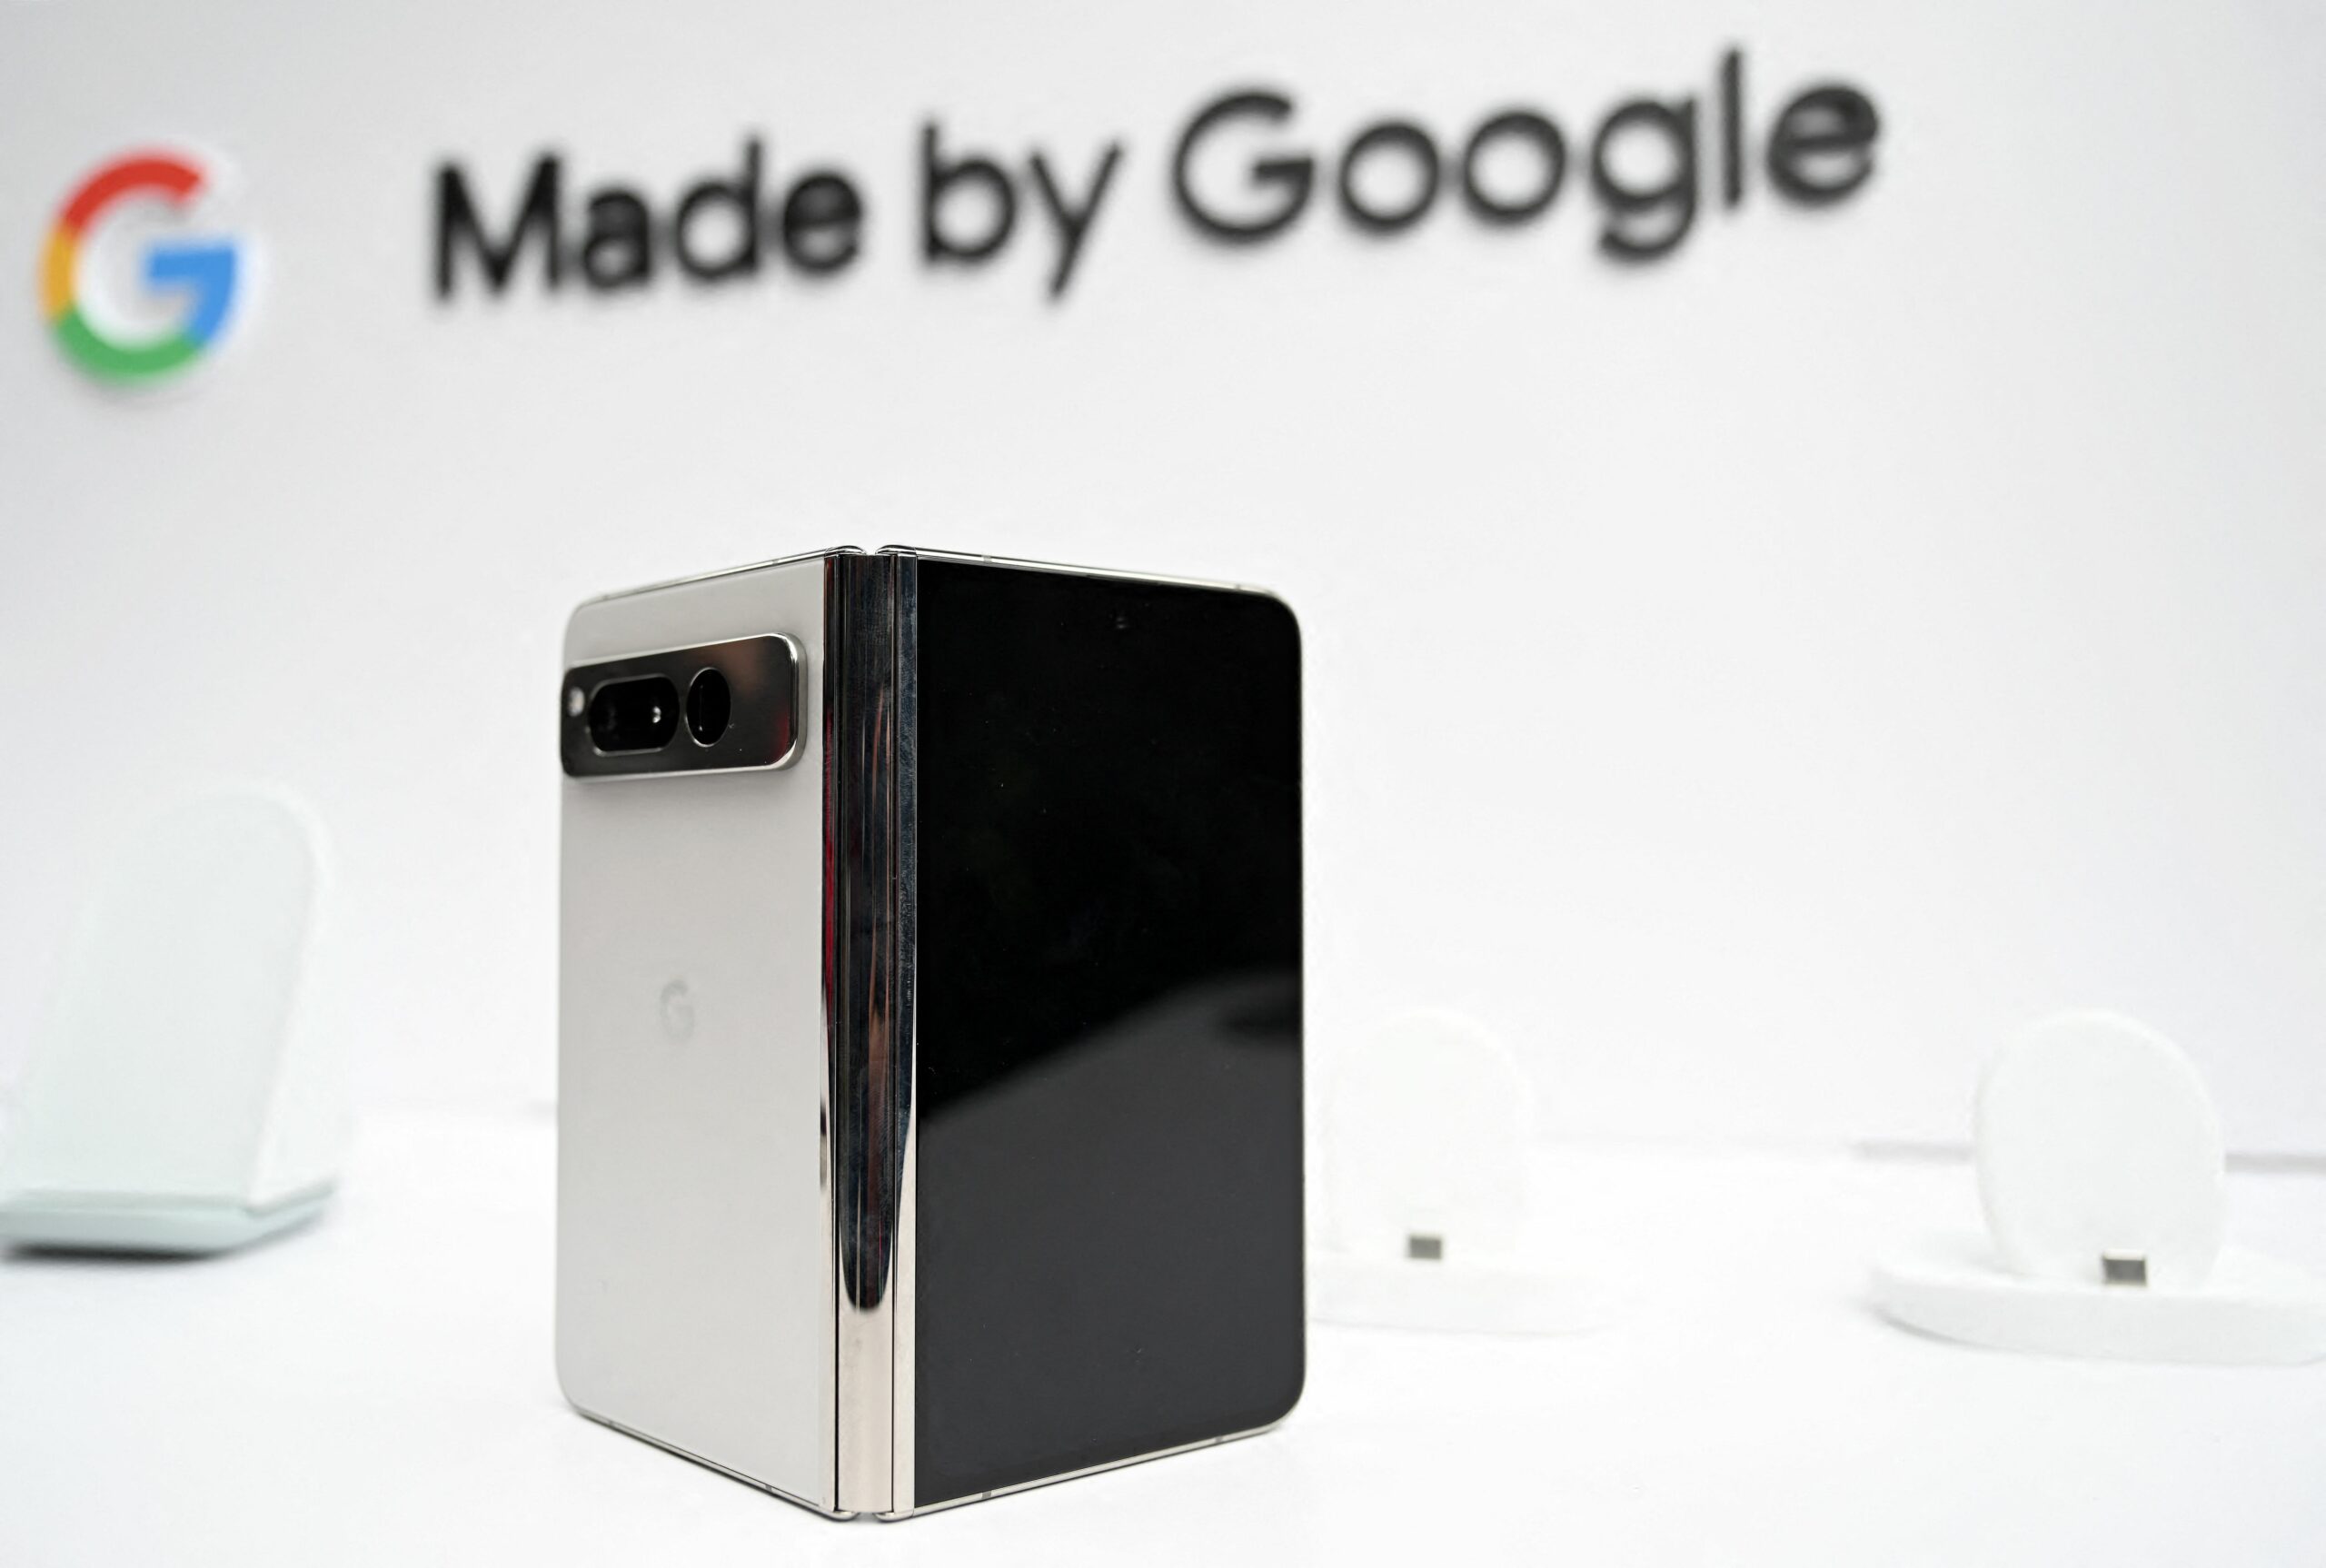 The new Google Pixel Fold phone is seen in a media area during the Google I/O, annual developers conference at Shoreline Amphitheatre in Mountain View, California